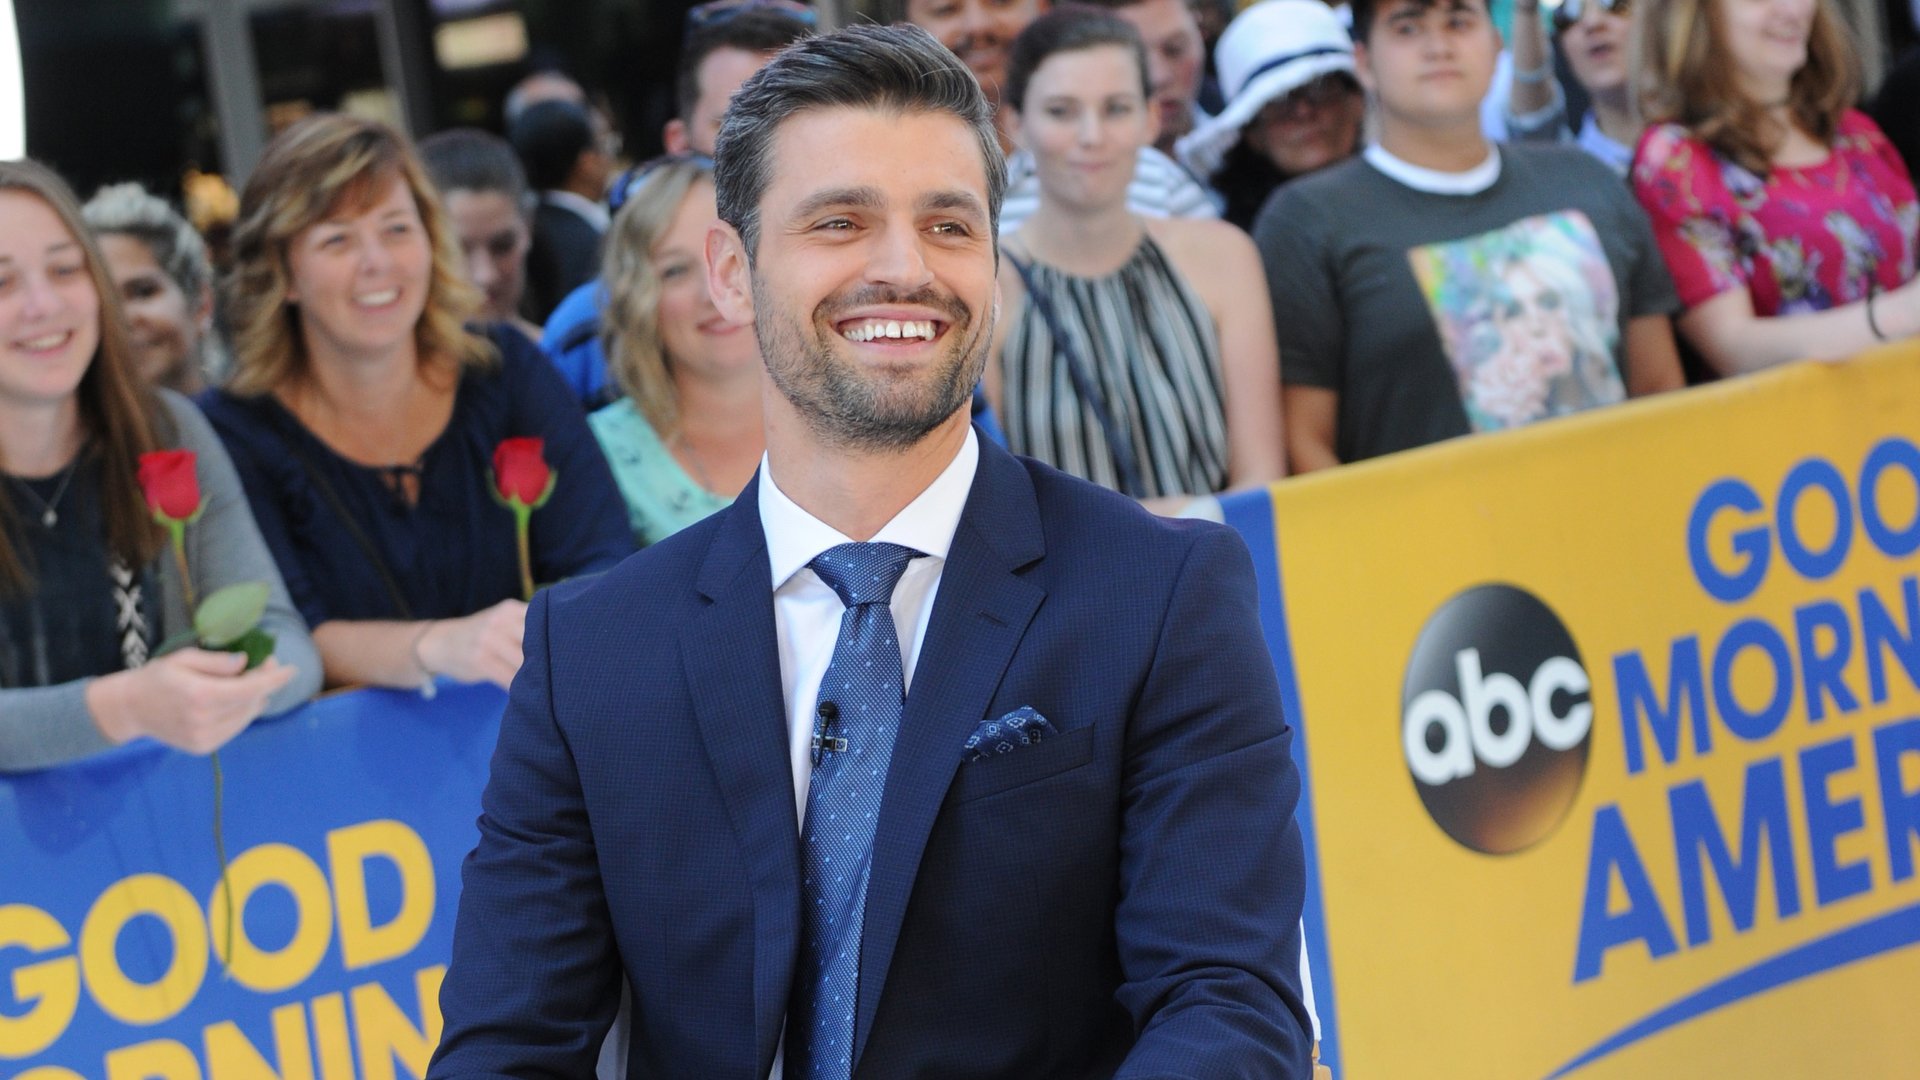 Peter Kraus from "The Bachelorette" guest on "Good Morning America"